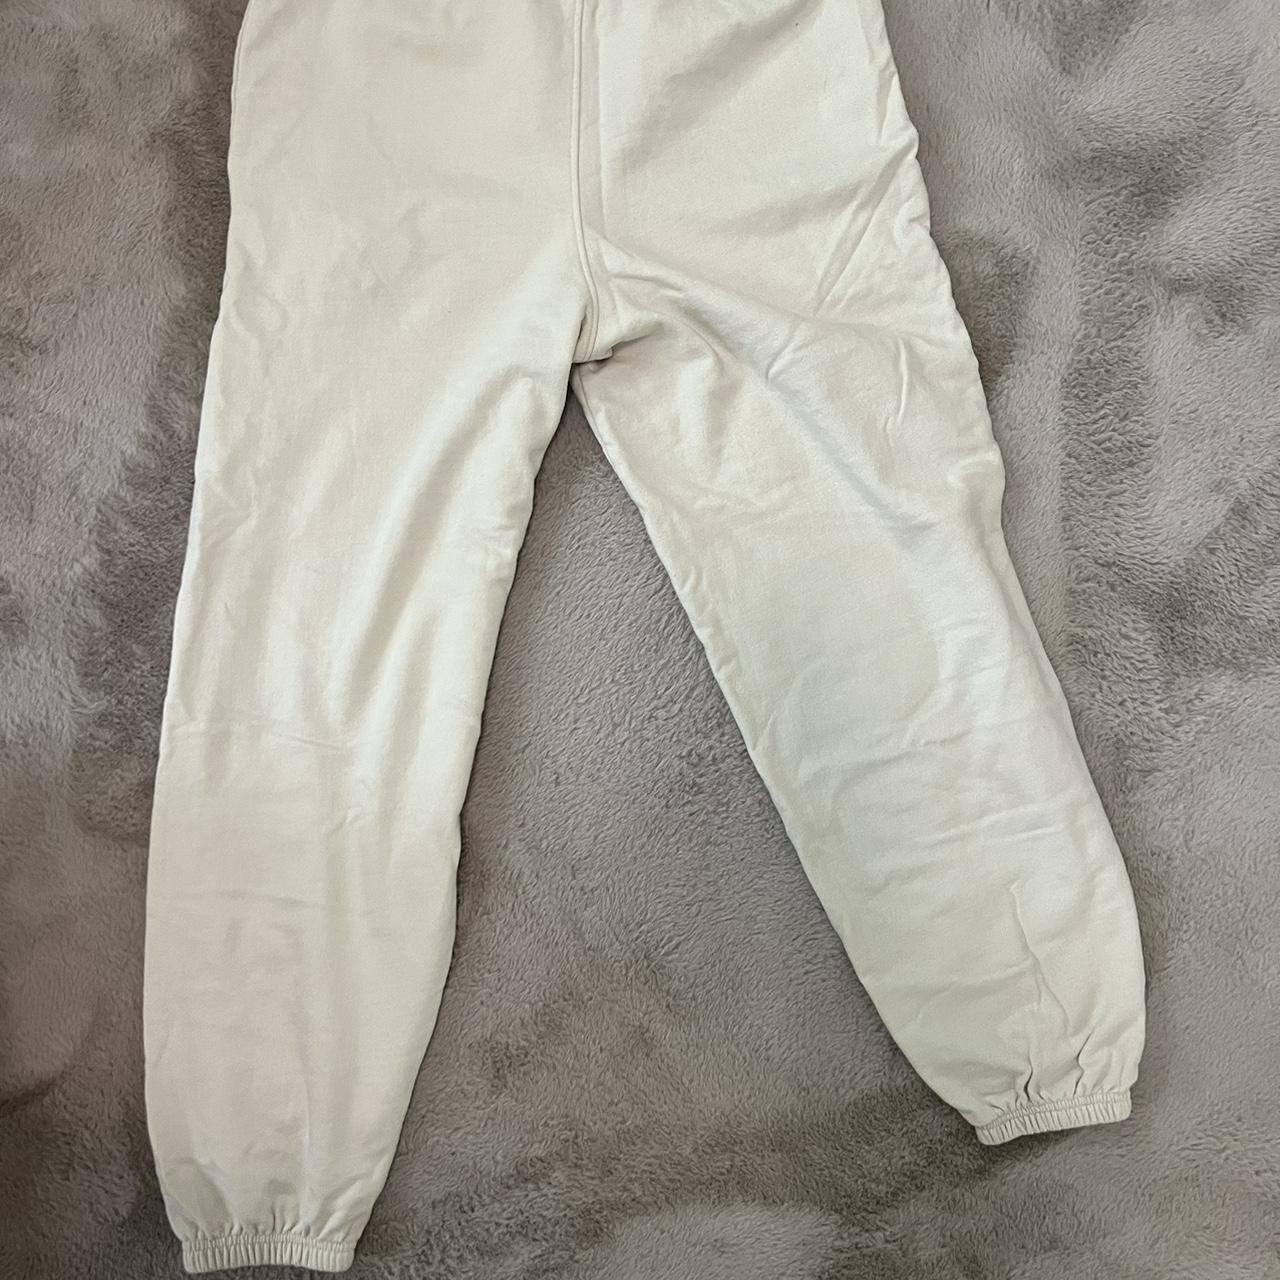 PacSun Women's Cream and Tan Joggers-tracksuits | Depop